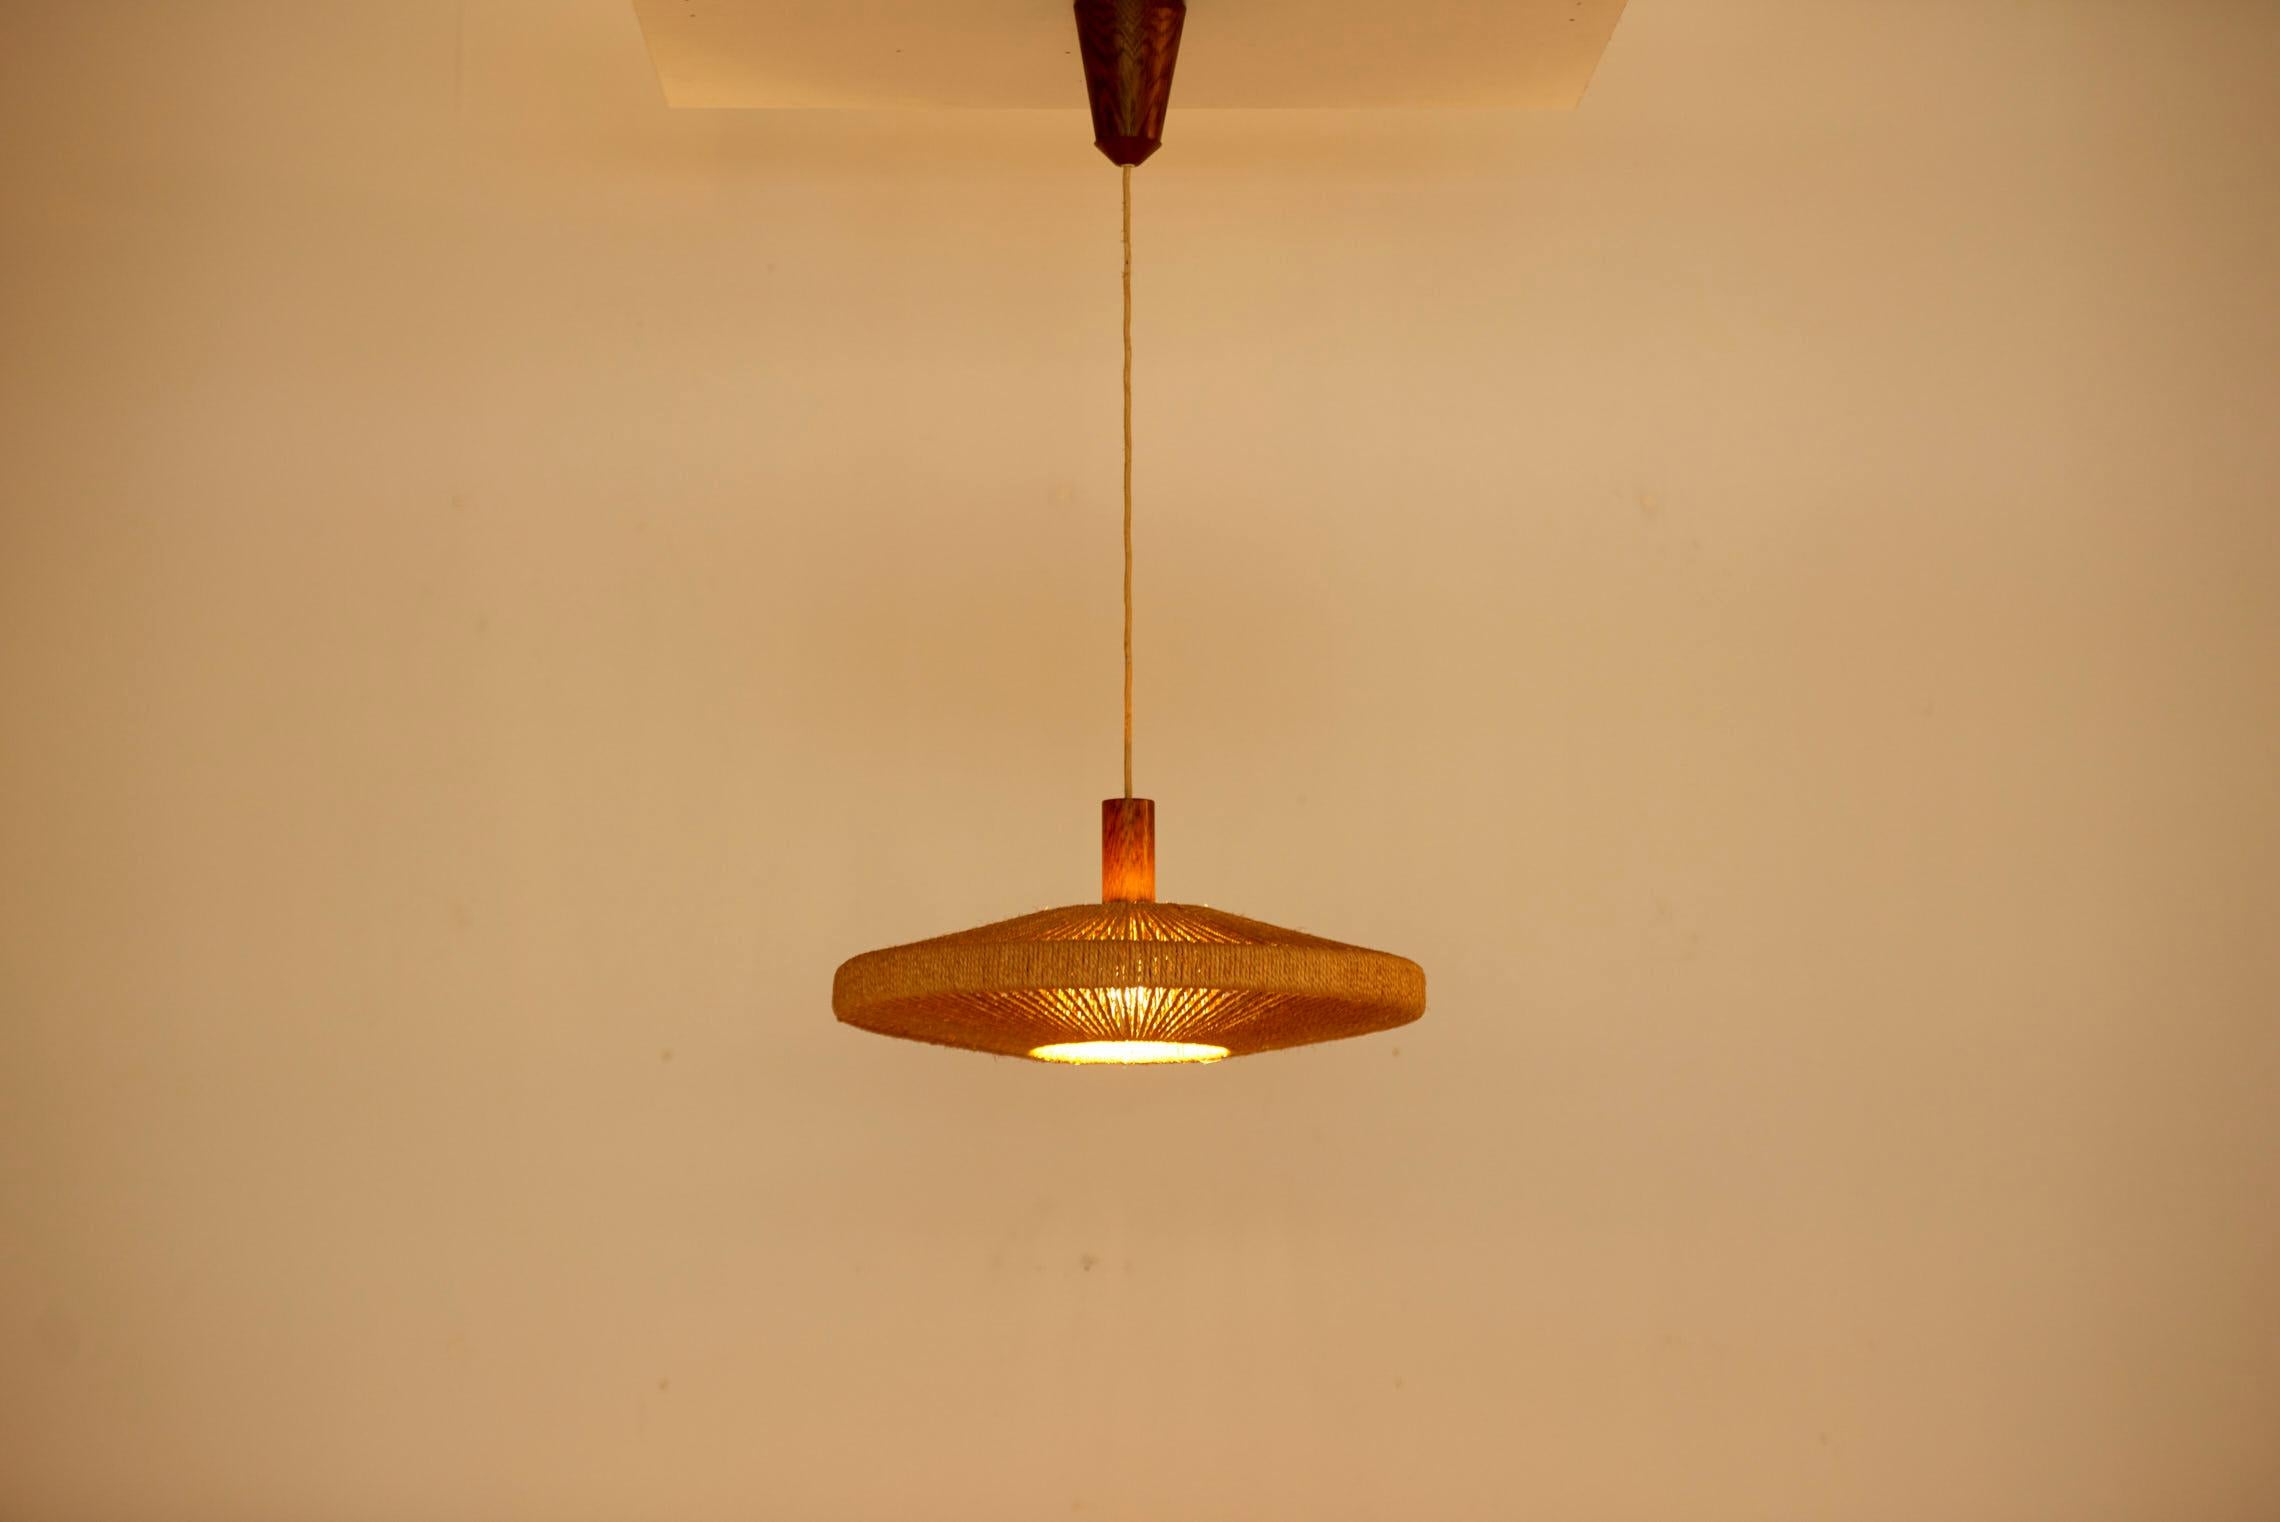 Large Temde Leuchten Sisal pendant lamp, Switzerland, 1950s. The measurements given for the height apply to the height of the shade. 1x Model A / E27 bulb. Please note: Lamp should be fitted professionally in accordance to local requirements.